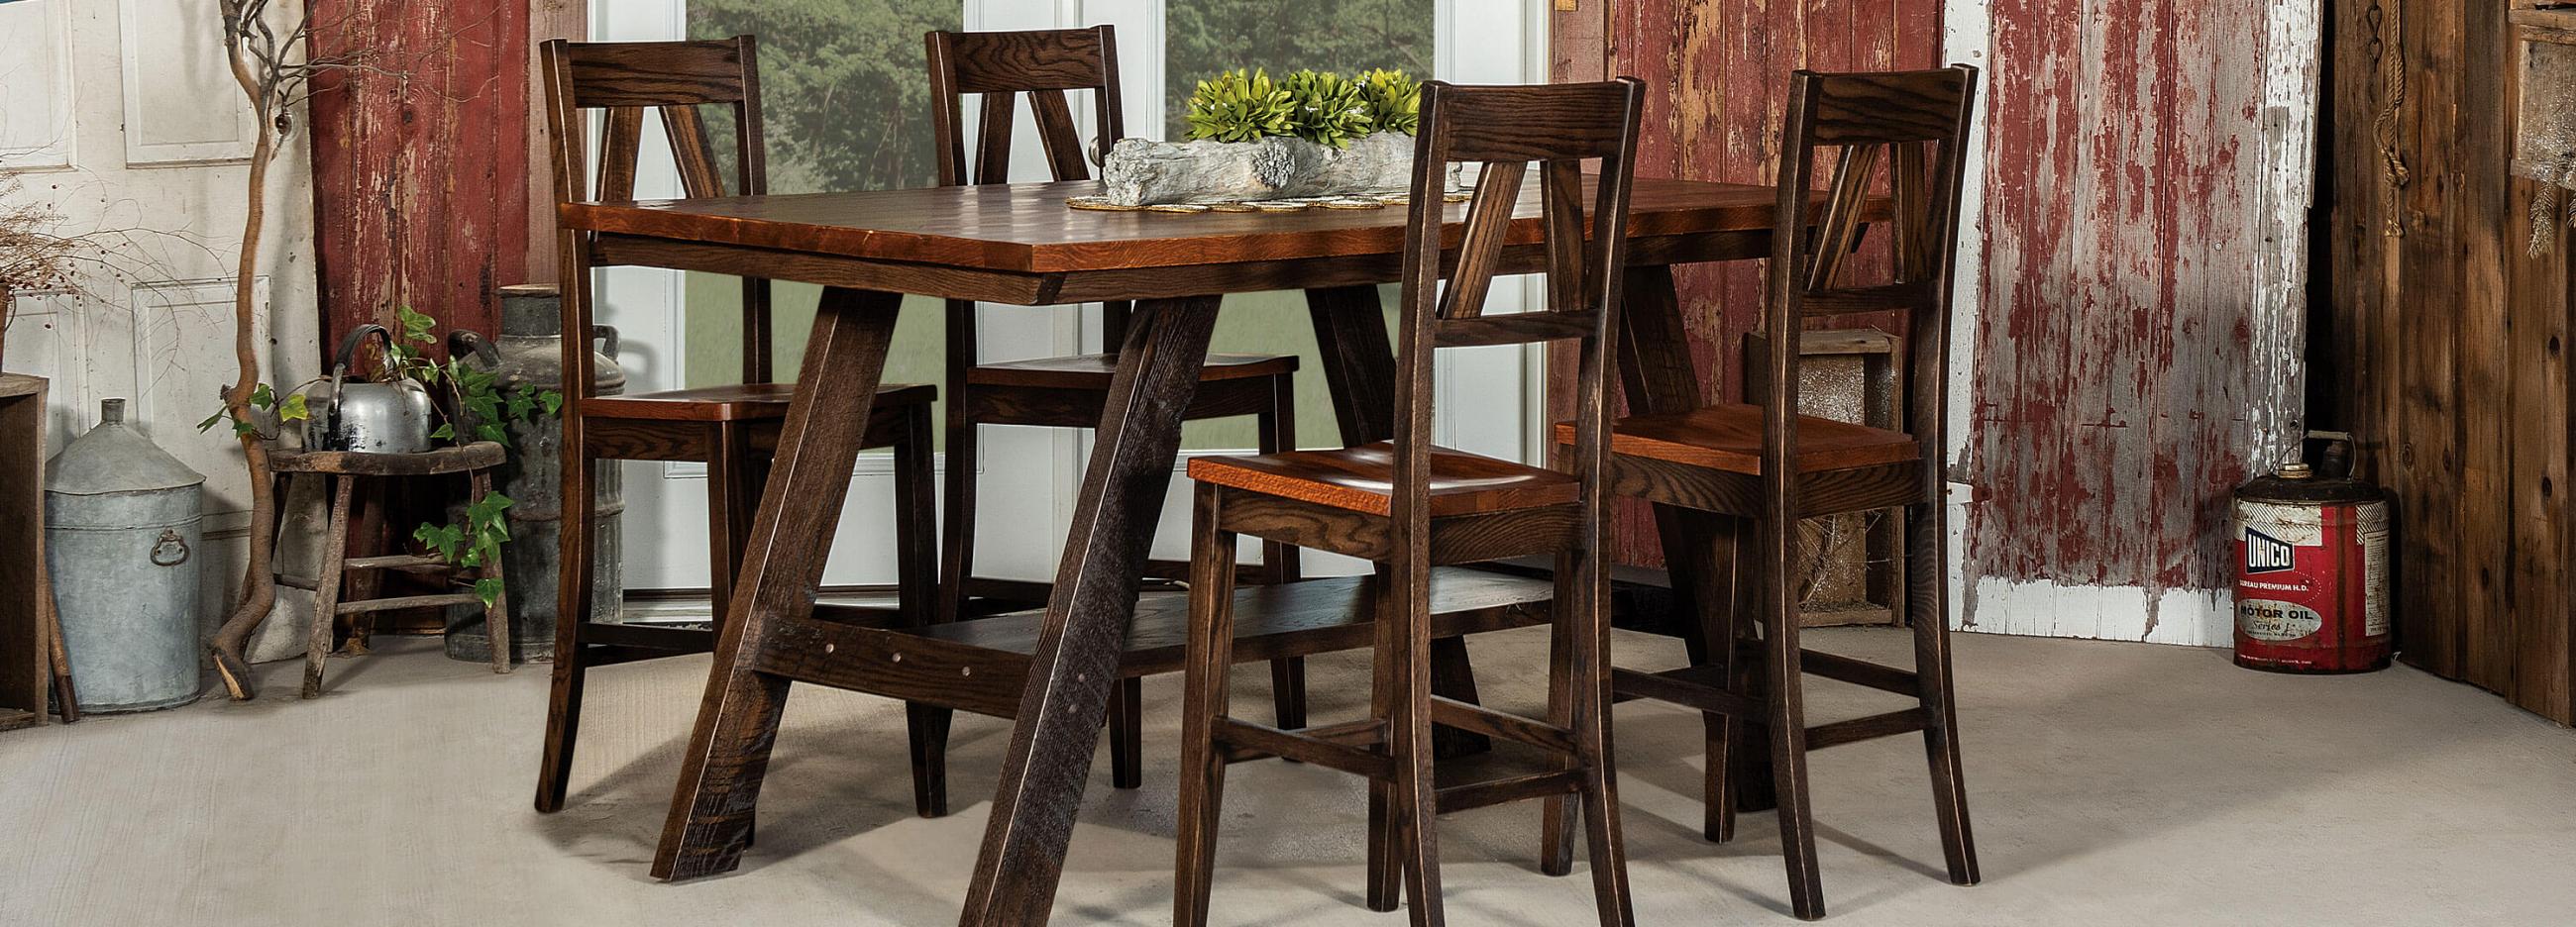 Troyer Design Company Dining Room Furniture